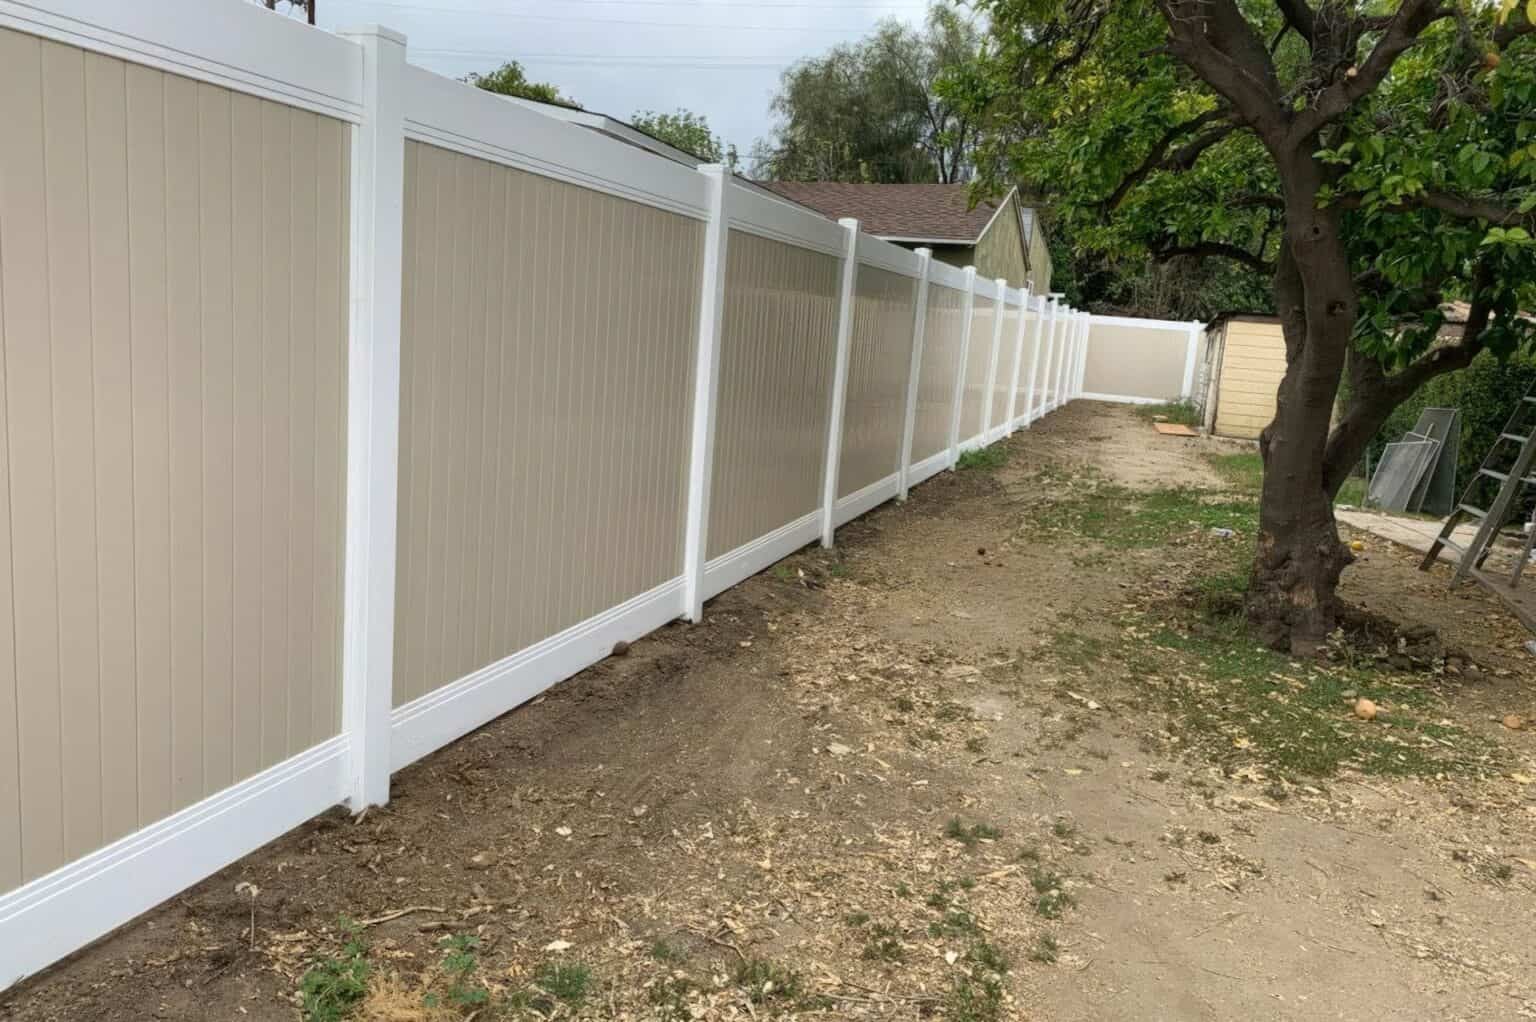 Tan vinyl fence creating boundary around modern suburban home with large tree in the backyard and other houses in the back.